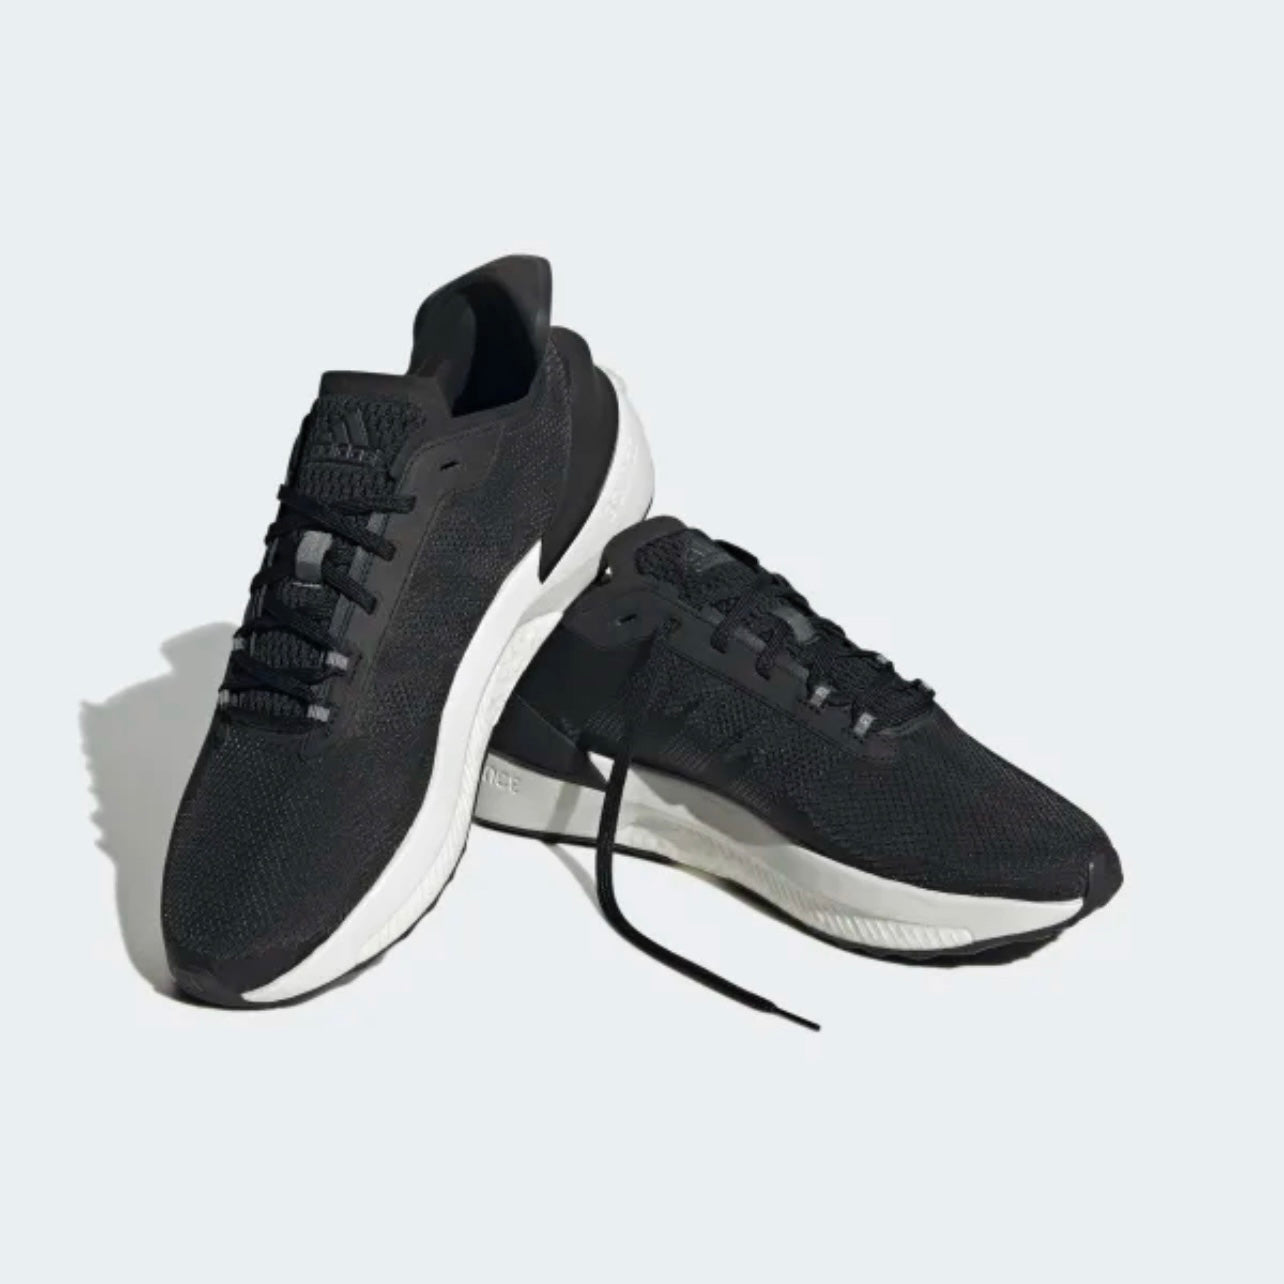 Adidas sneakers for men (HP5962)in black and white